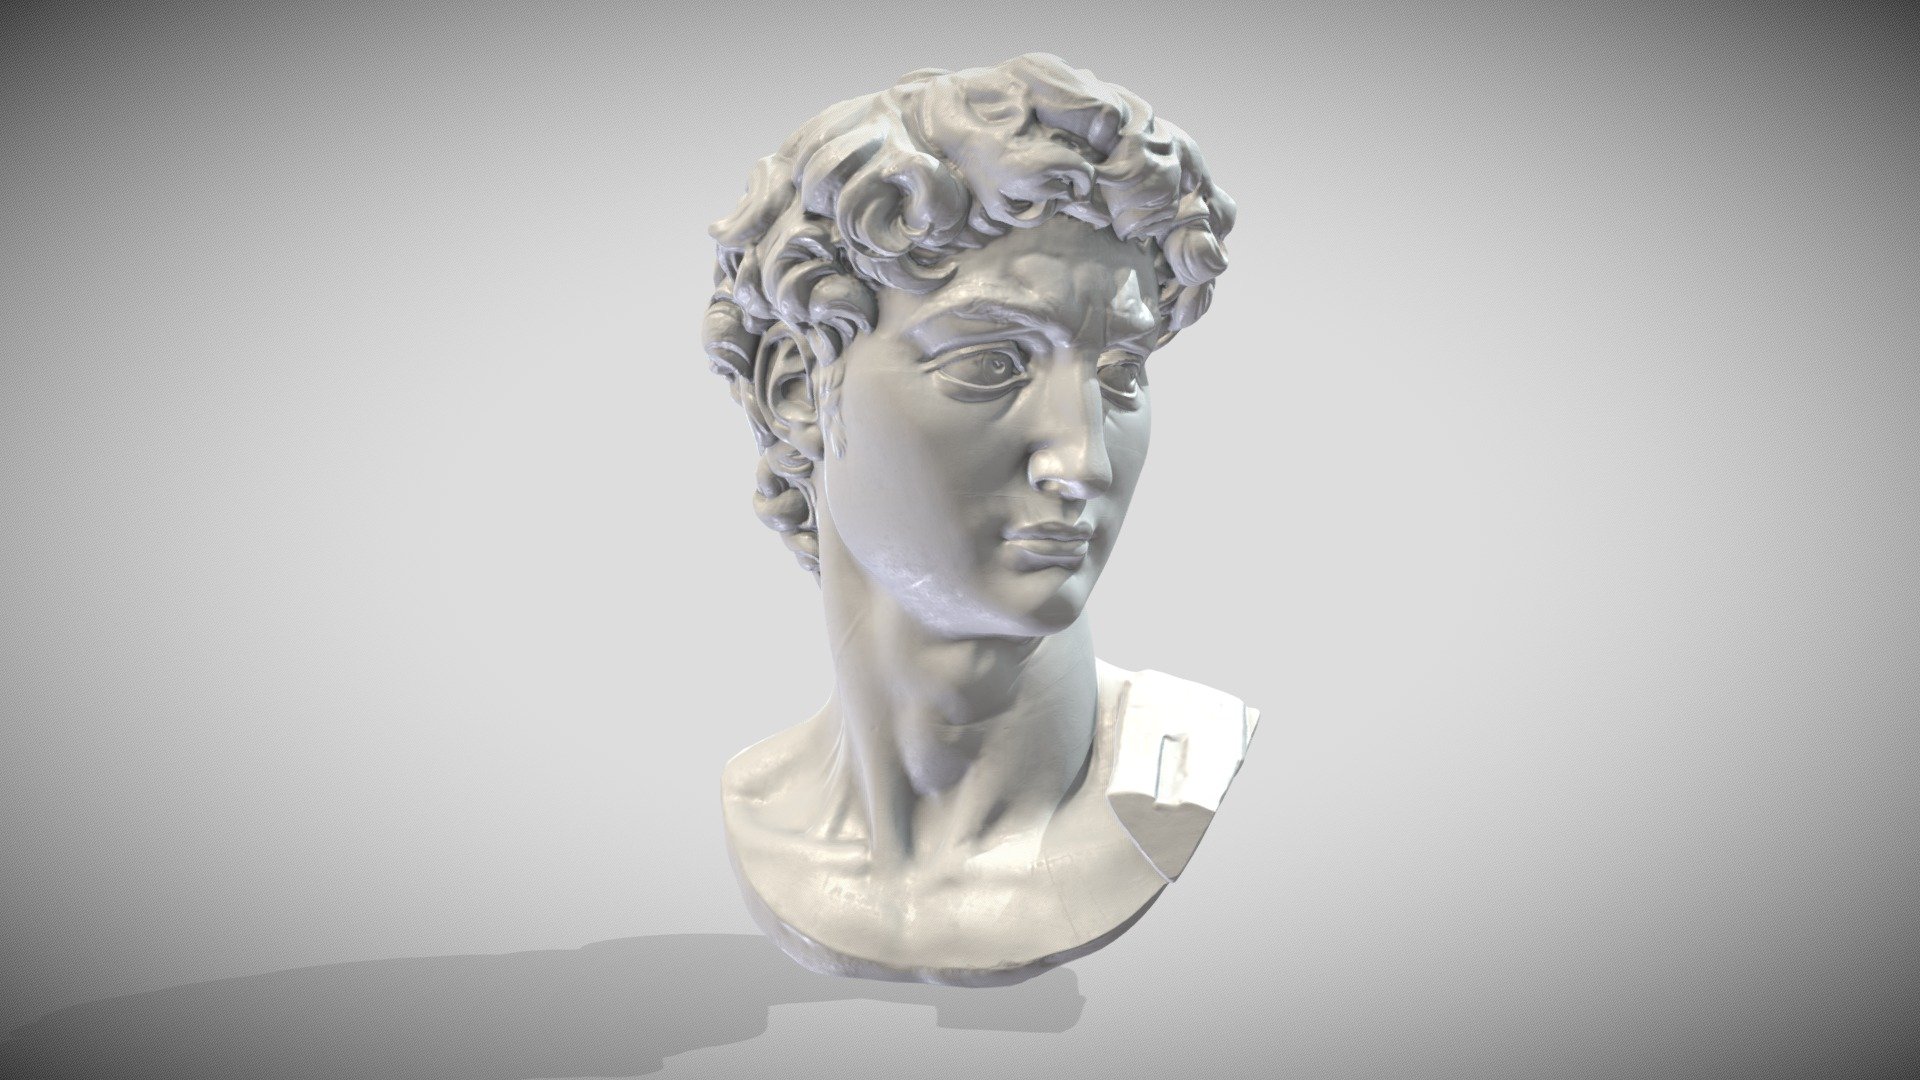 Original very nice 3D Scan from the SMK - Statens Museum for Kunst

https://collection.smk.dk/#/detail/KAS793

here the Painted Gaming Version LR....

Version Two has Better Resolution - David Head Version Two - Buy Royalty Free 3D model by Francesco Coldesina (@topfrank2013) 3d model